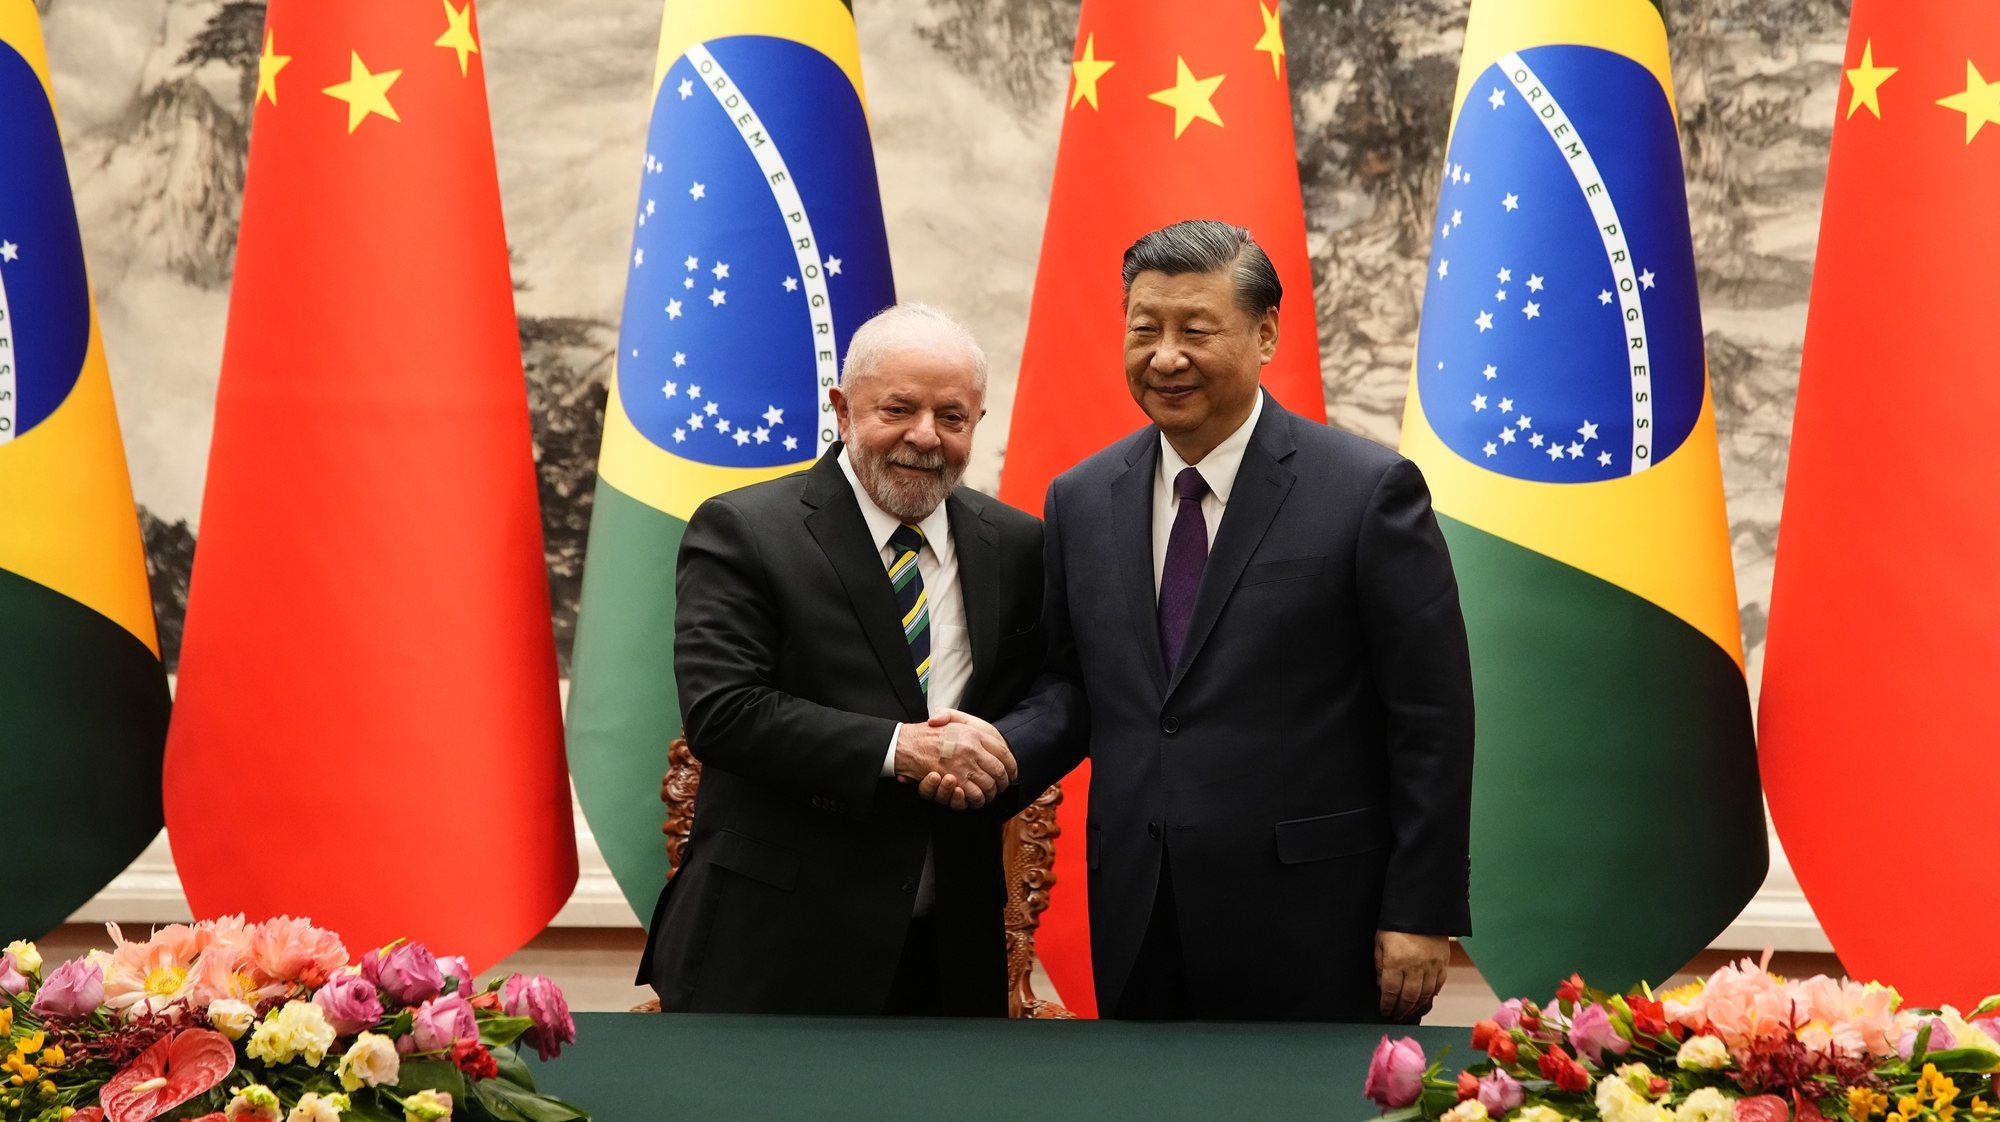 epa10572273 Brazilian President Luiz Inacio Lula da Silva (L) shakes hands with Chinese President Xi Jinping after a signing ceremony held at the Great Hall of the People in Beijing, China, 14 April 2023.  EPA/KEN ISHII / POOL